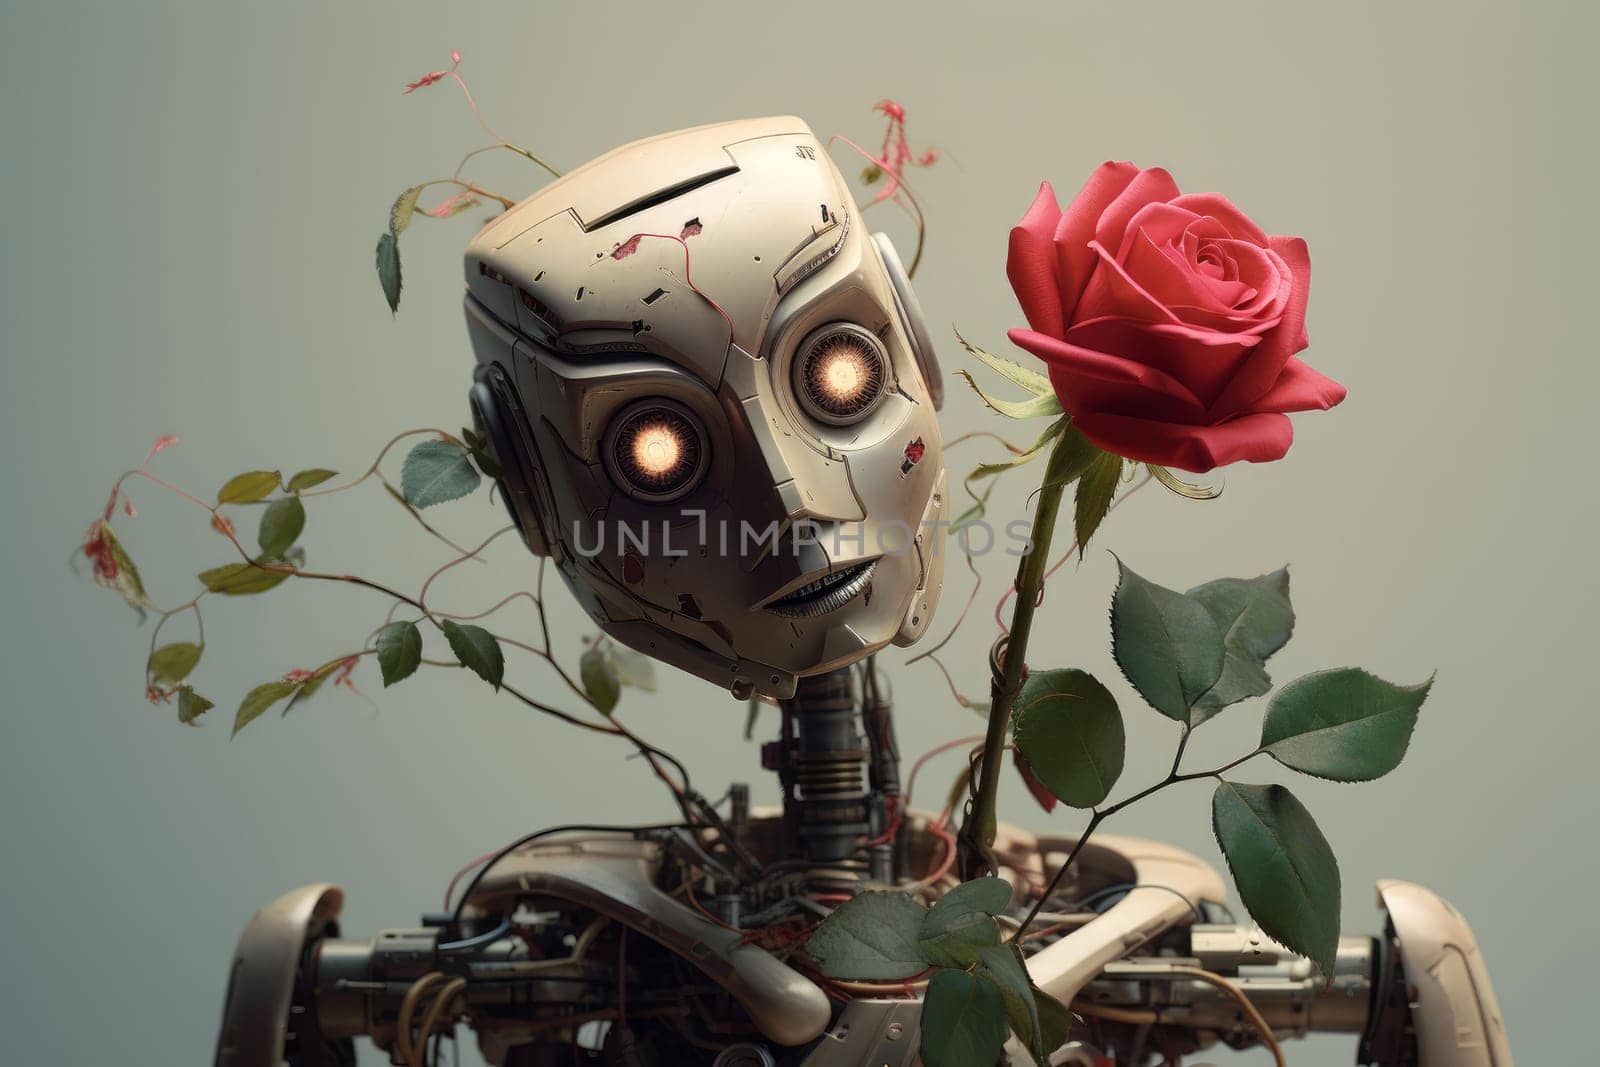 Curious Robot thinking about love. Take rose flower. Generate Ai